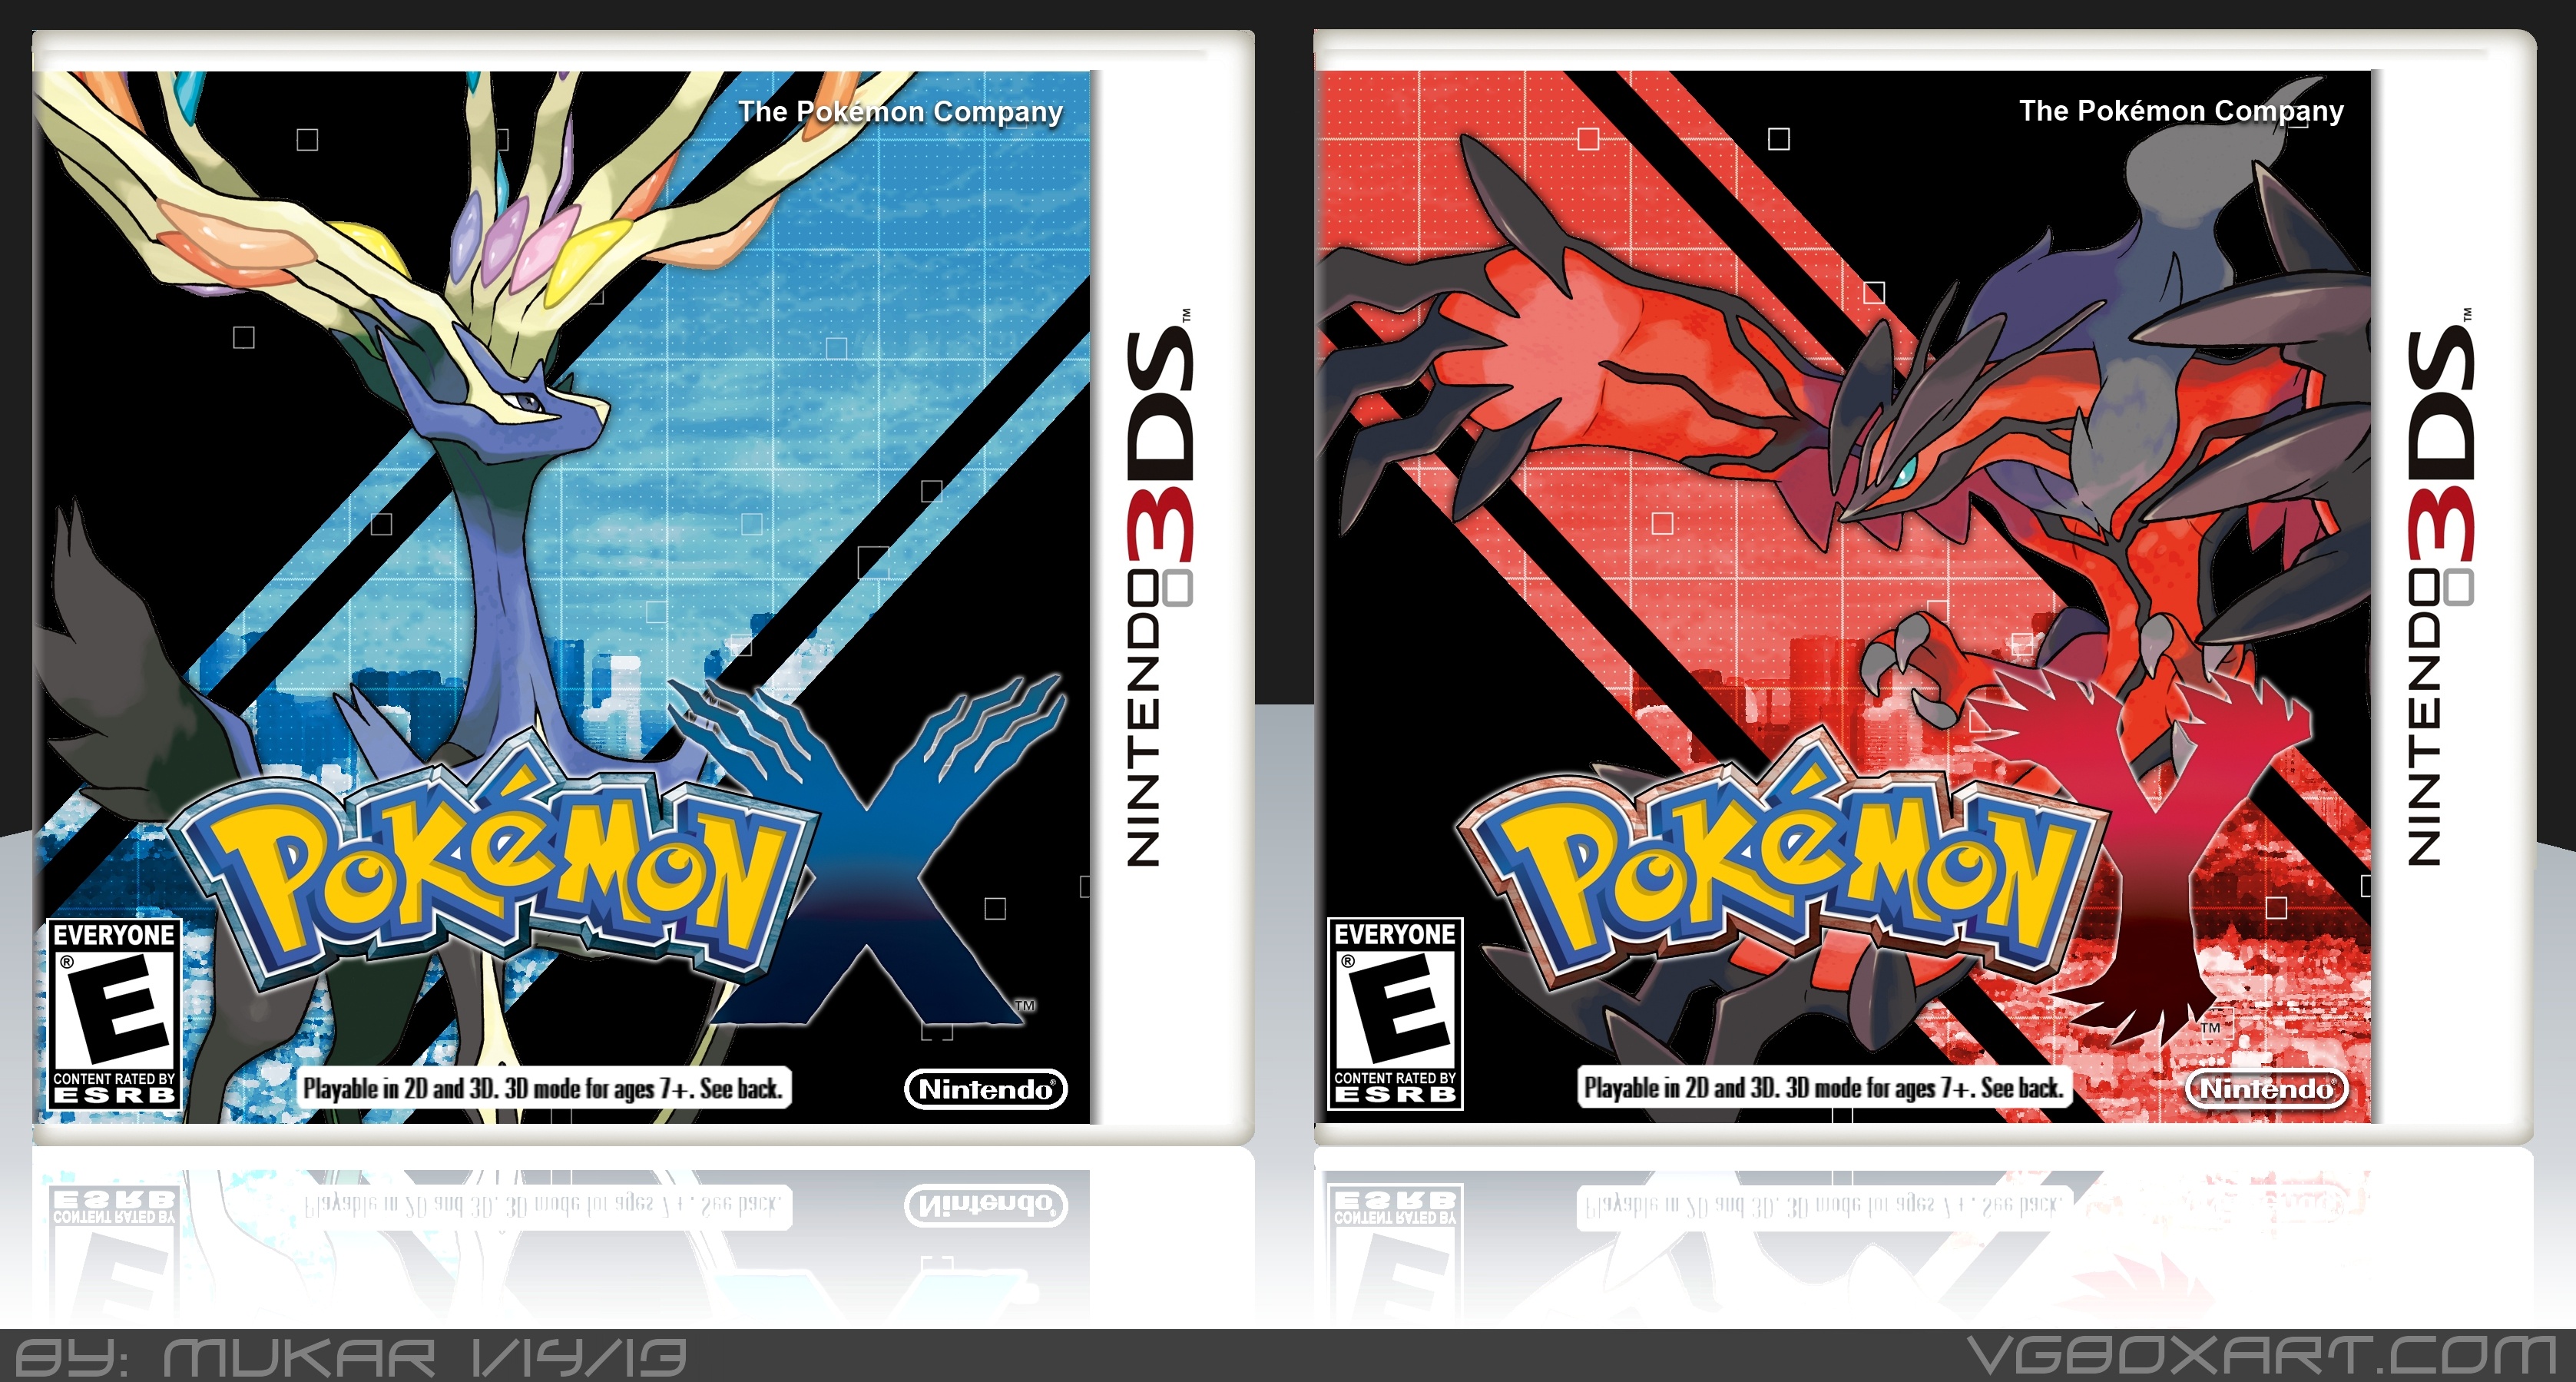 Pokemon X and Y box cover